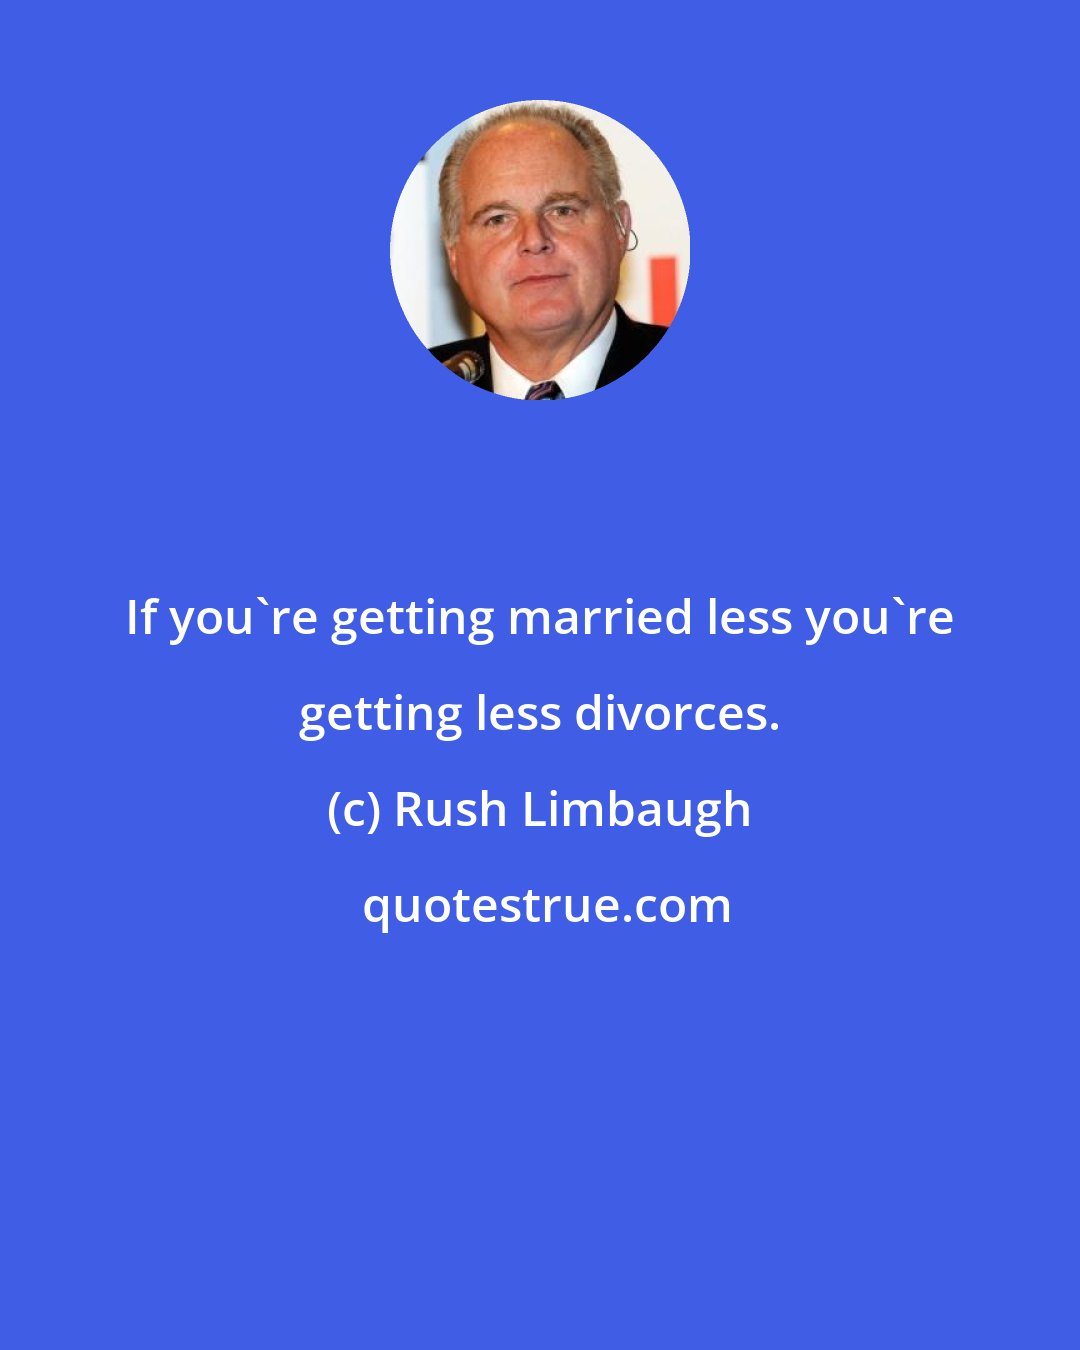 Rush Limbaugh: If you're getting married less you're getting less divorces.